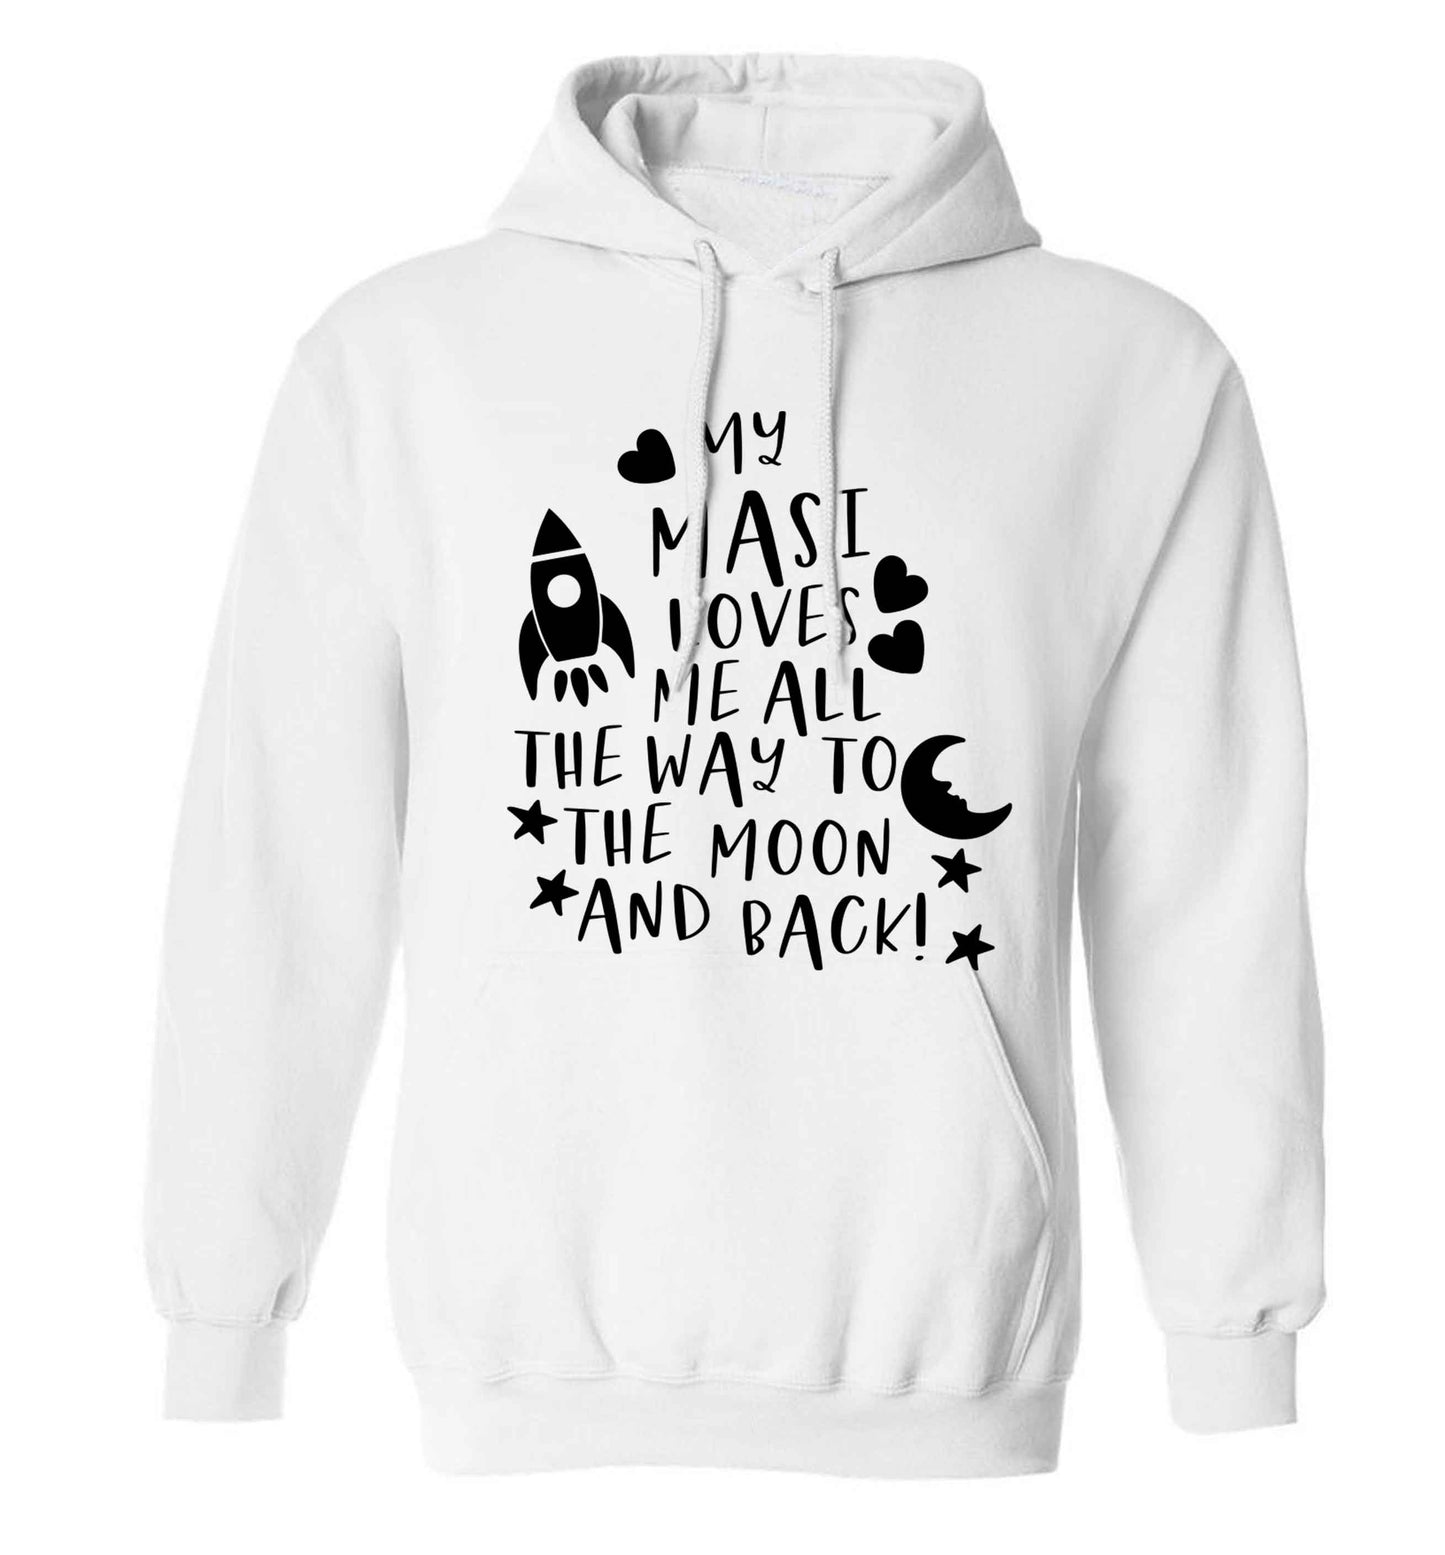 My masi loves me all the way to the moon and back adults unisex white hoodie 2XL